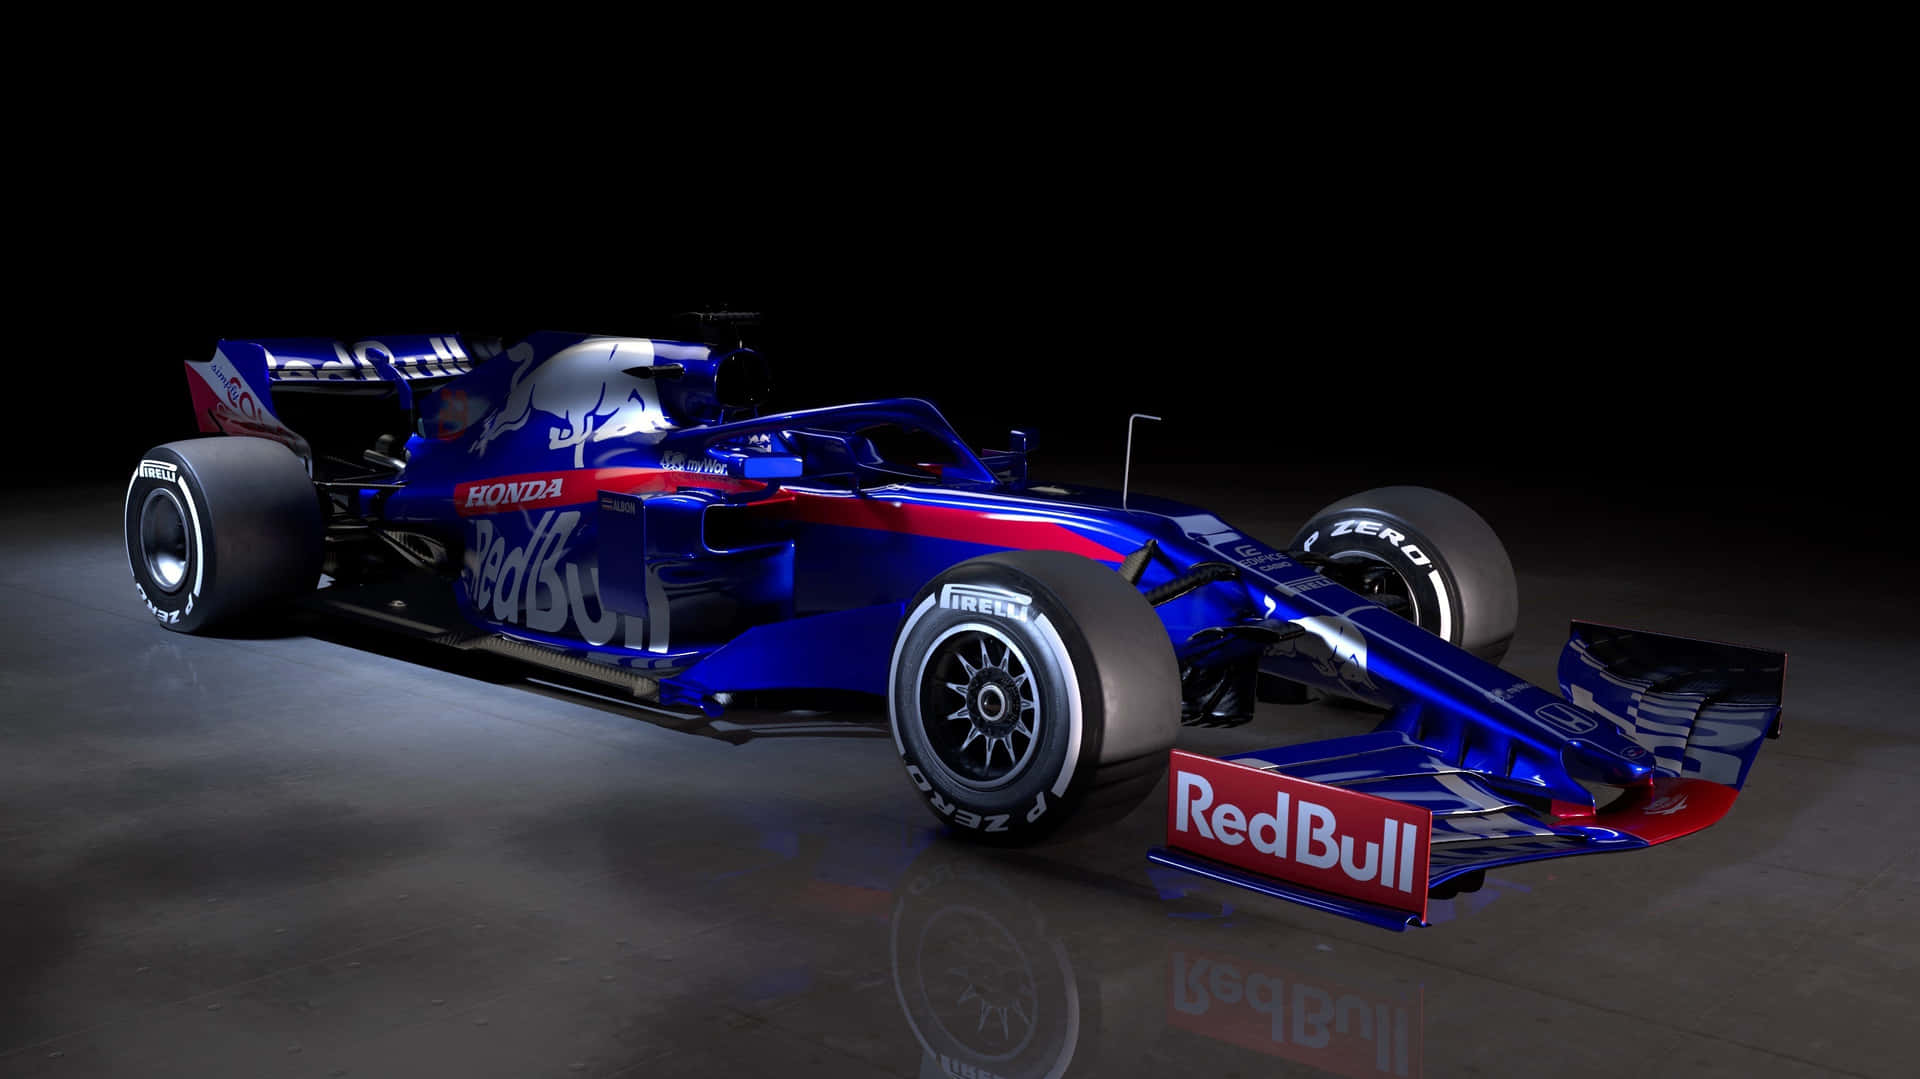 Red Bull Racing Rb11 - Rb11 - Rb11 - Rb11 - Rb11